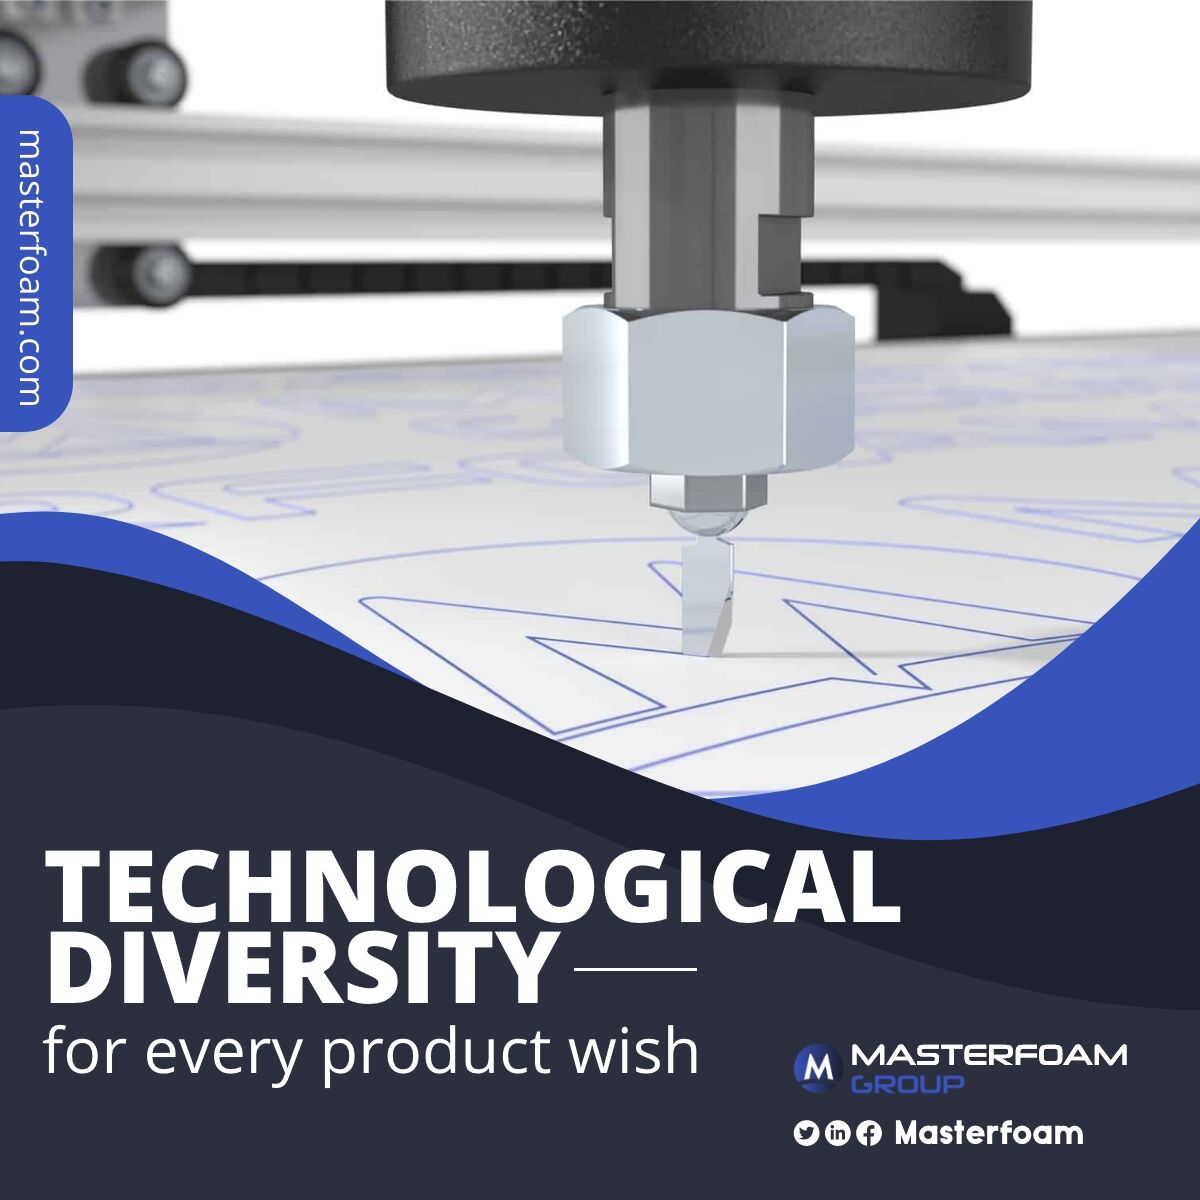 Technological Diversity for every product wish